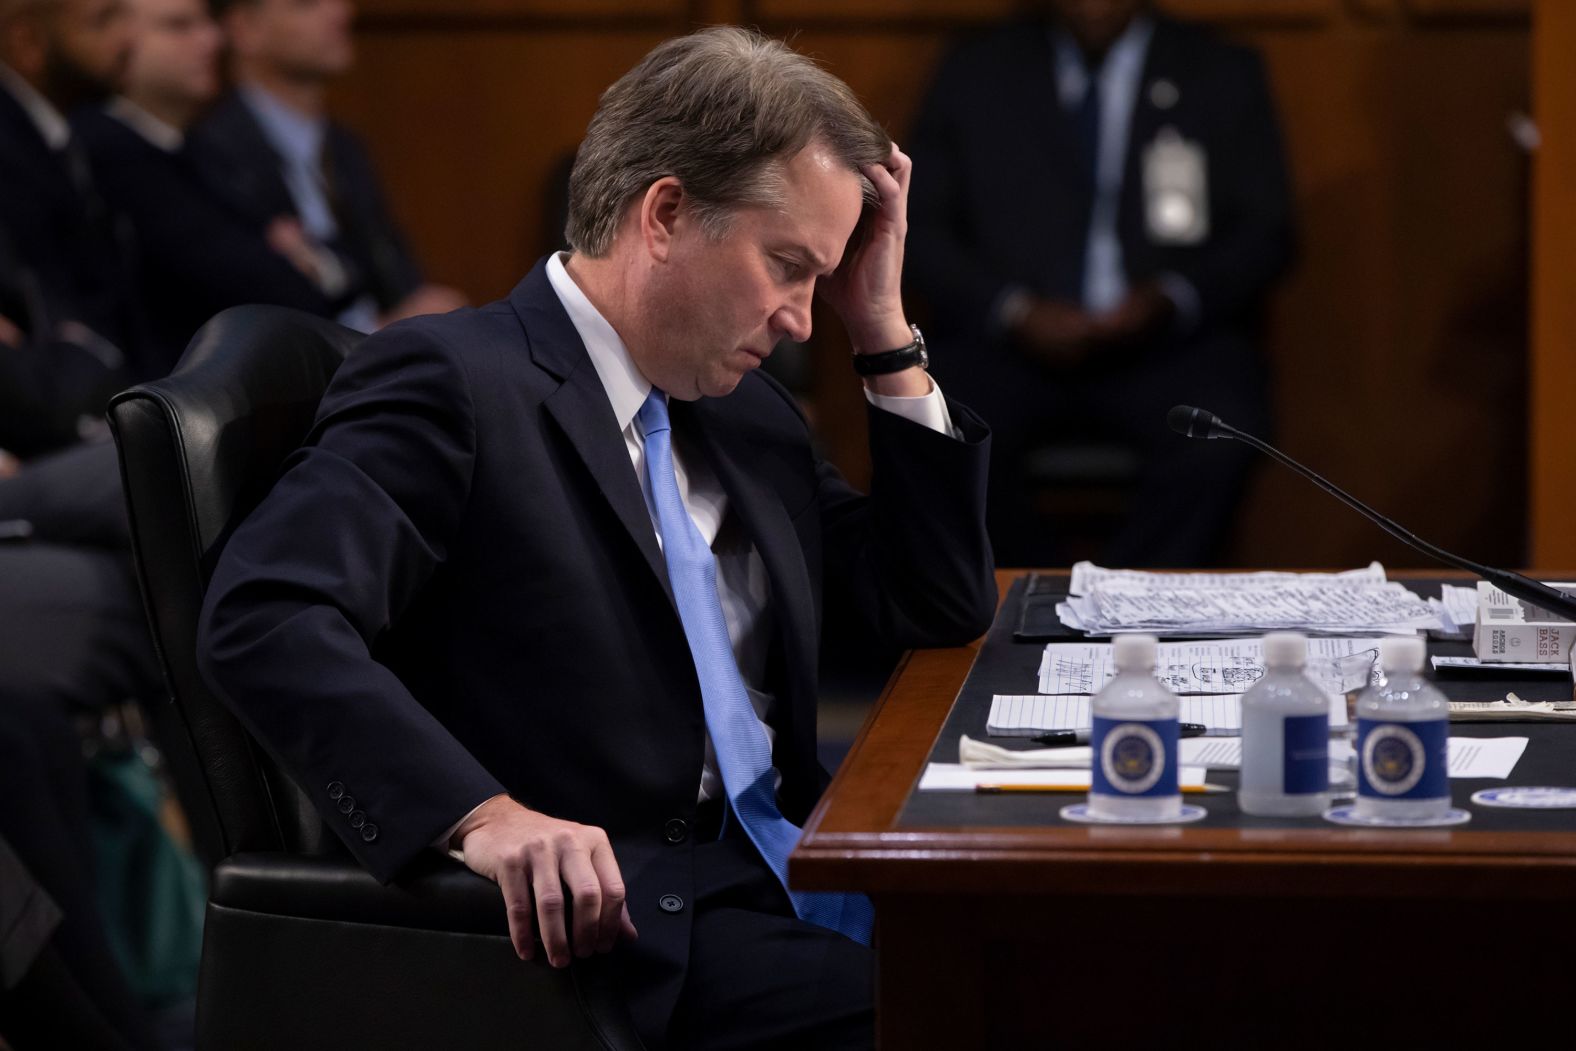 During more than an hour of delay over procedural questions, Kavanaugh waits to testify before the Senate Judiciary Committee on Thursday.